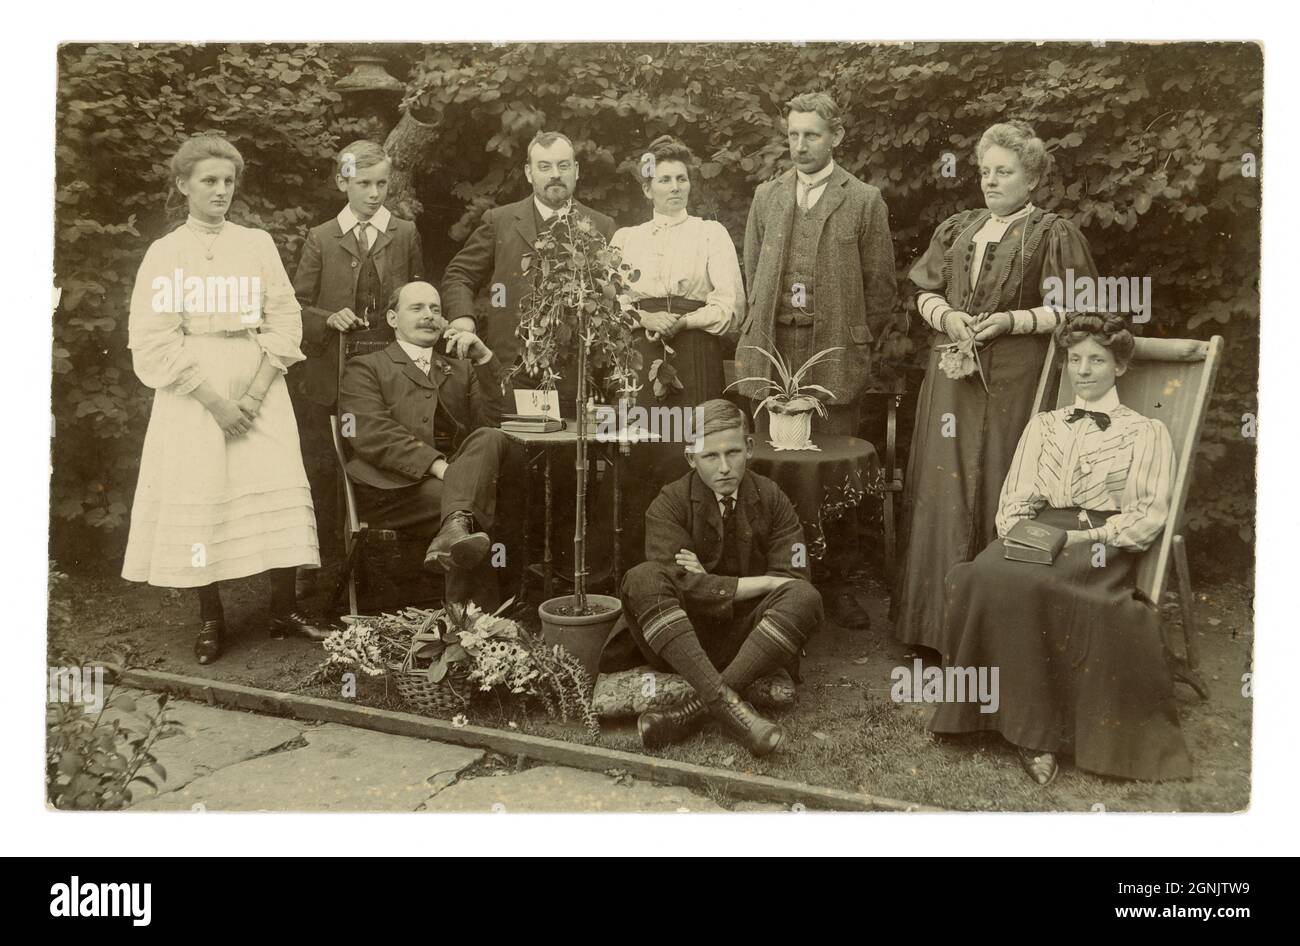 Wonderful original very clear Edwardian real photographic postcard of large Edwardian family group outside in garden on Whit Sunday June 26th 1908, basket of flowers prop, good examples of fashions, men and boy's collars (different styles), women and girl's skirts and blouses, photographer was W.J. Waller, Slinfold, Sussex England, U.K. Stock Photo